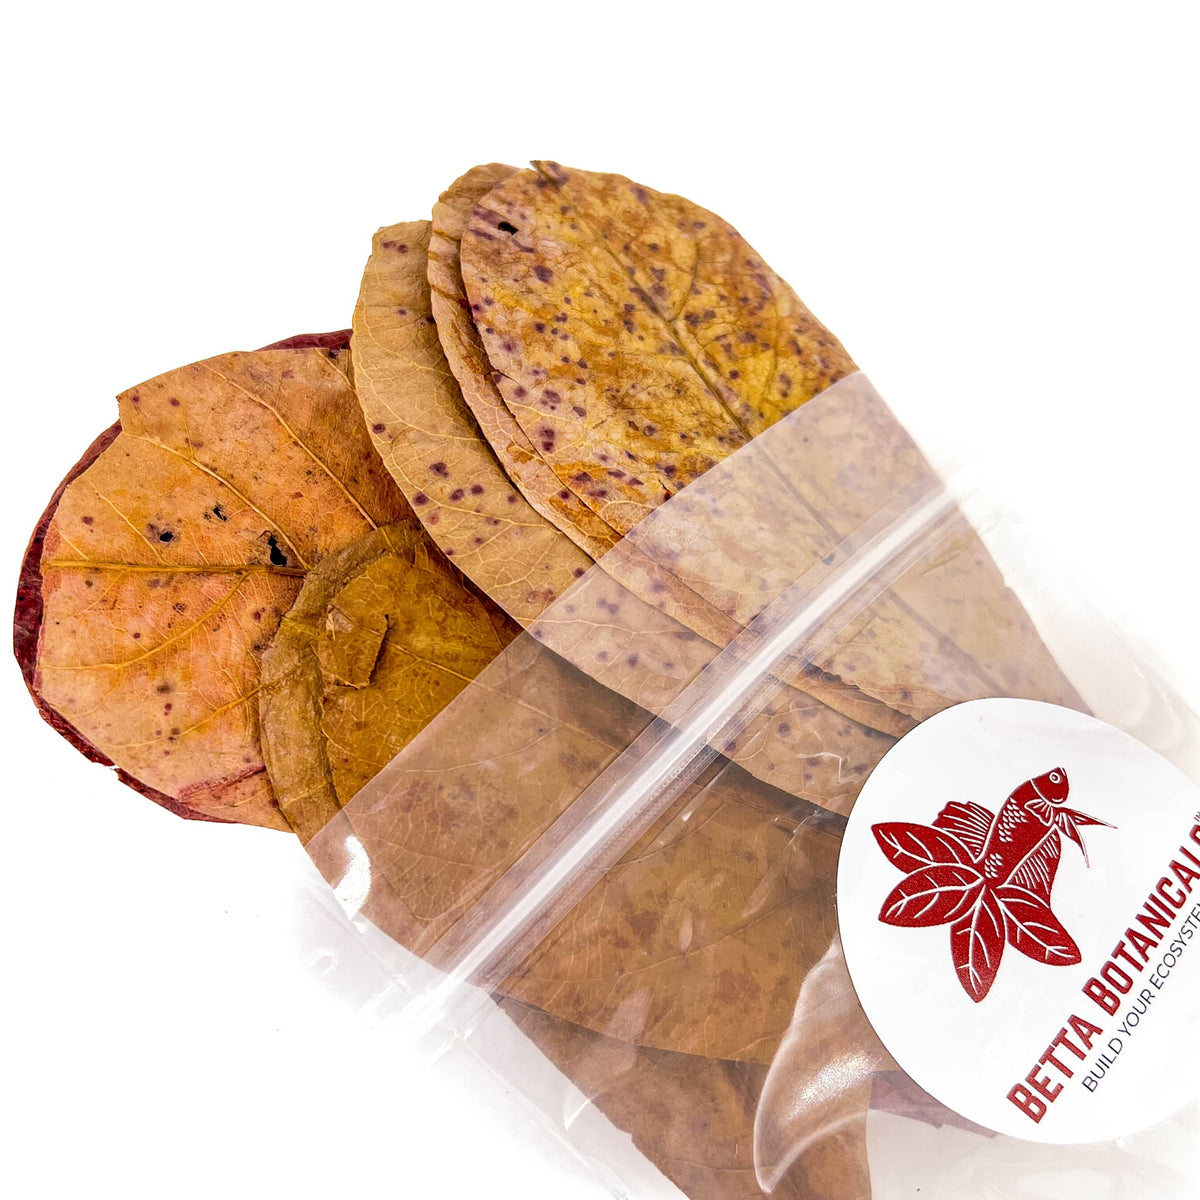 Pile of brown, amber, and speckled catappa leaves & Indian almond leaves for aquariums in clear sustainable packaging by Betta Botanicals.